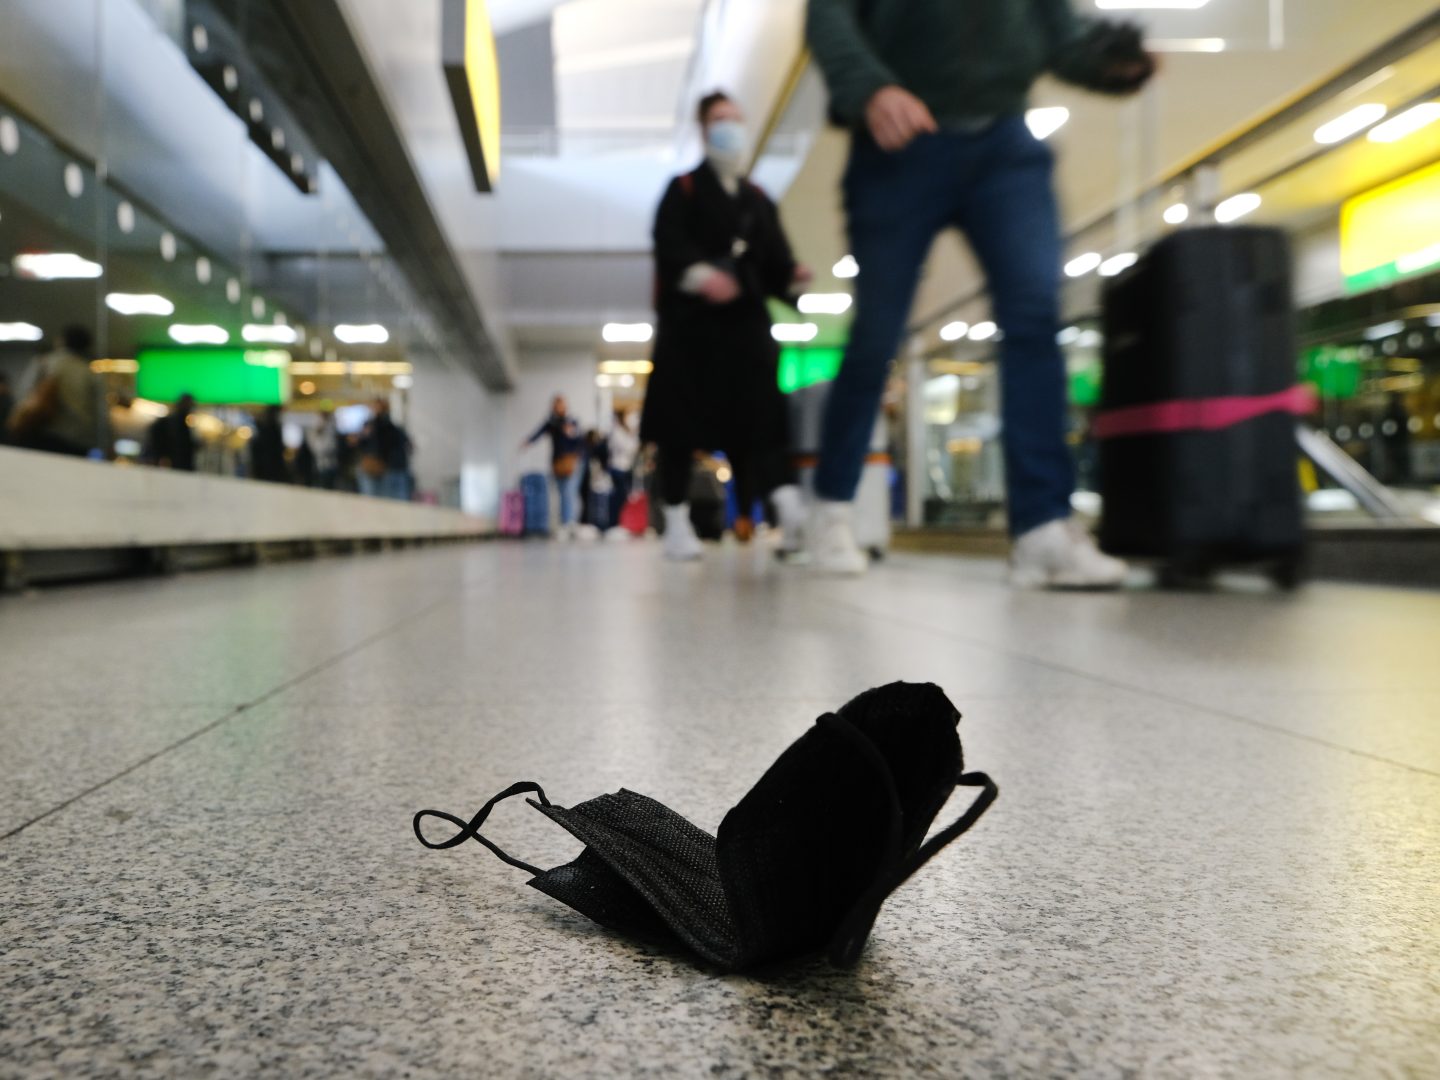 NEW YORK,  NY - APRIL 19: A mask is seen on the ground at John F.  Kennedy Airport on April 19, 2022 in New York City. On Monday, a federal judge in Florida struck down the mask mandate for airports and other methods of public transportation as a new COVID variant is on the rise across parts of the United States. (Photo by Spencer Platt/Getty Images)